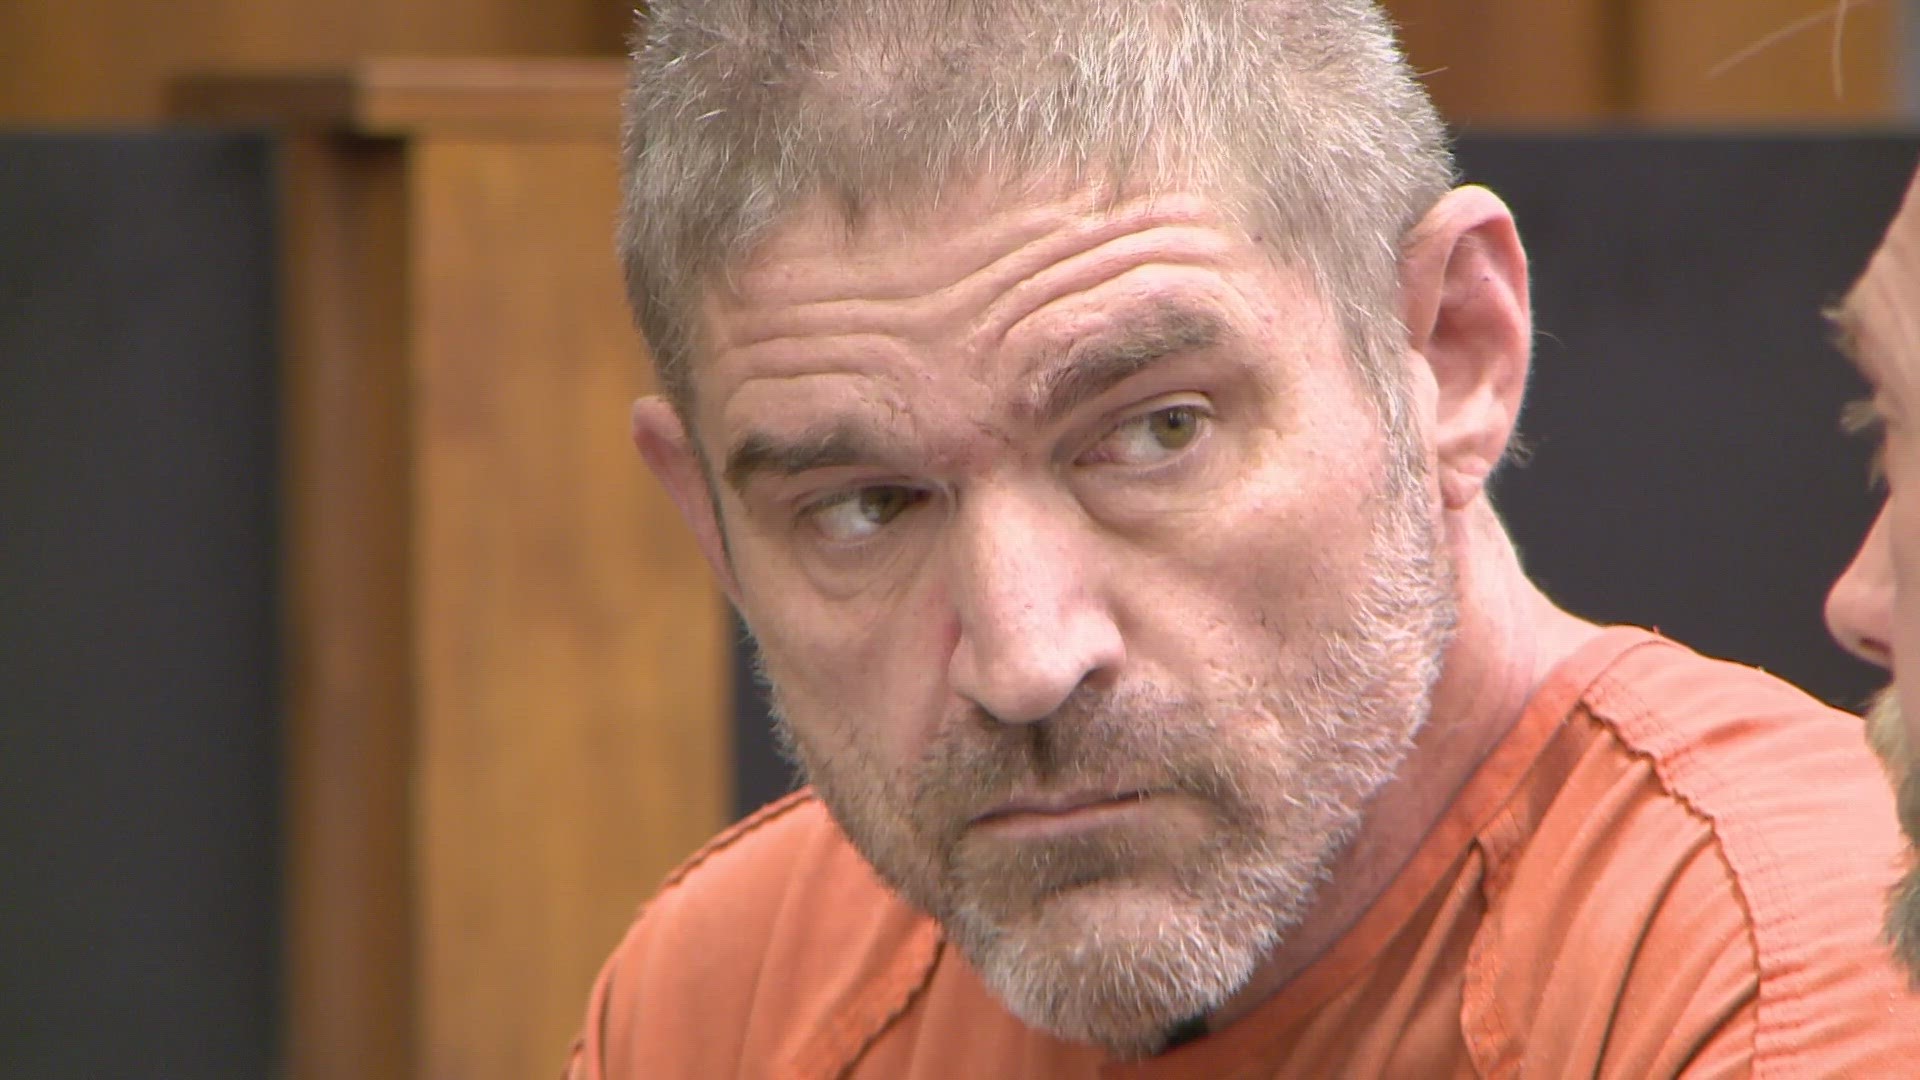 David Hollowell is accused of raping a 13-year-old girl and attempting to murder the man who tried to rescue her.